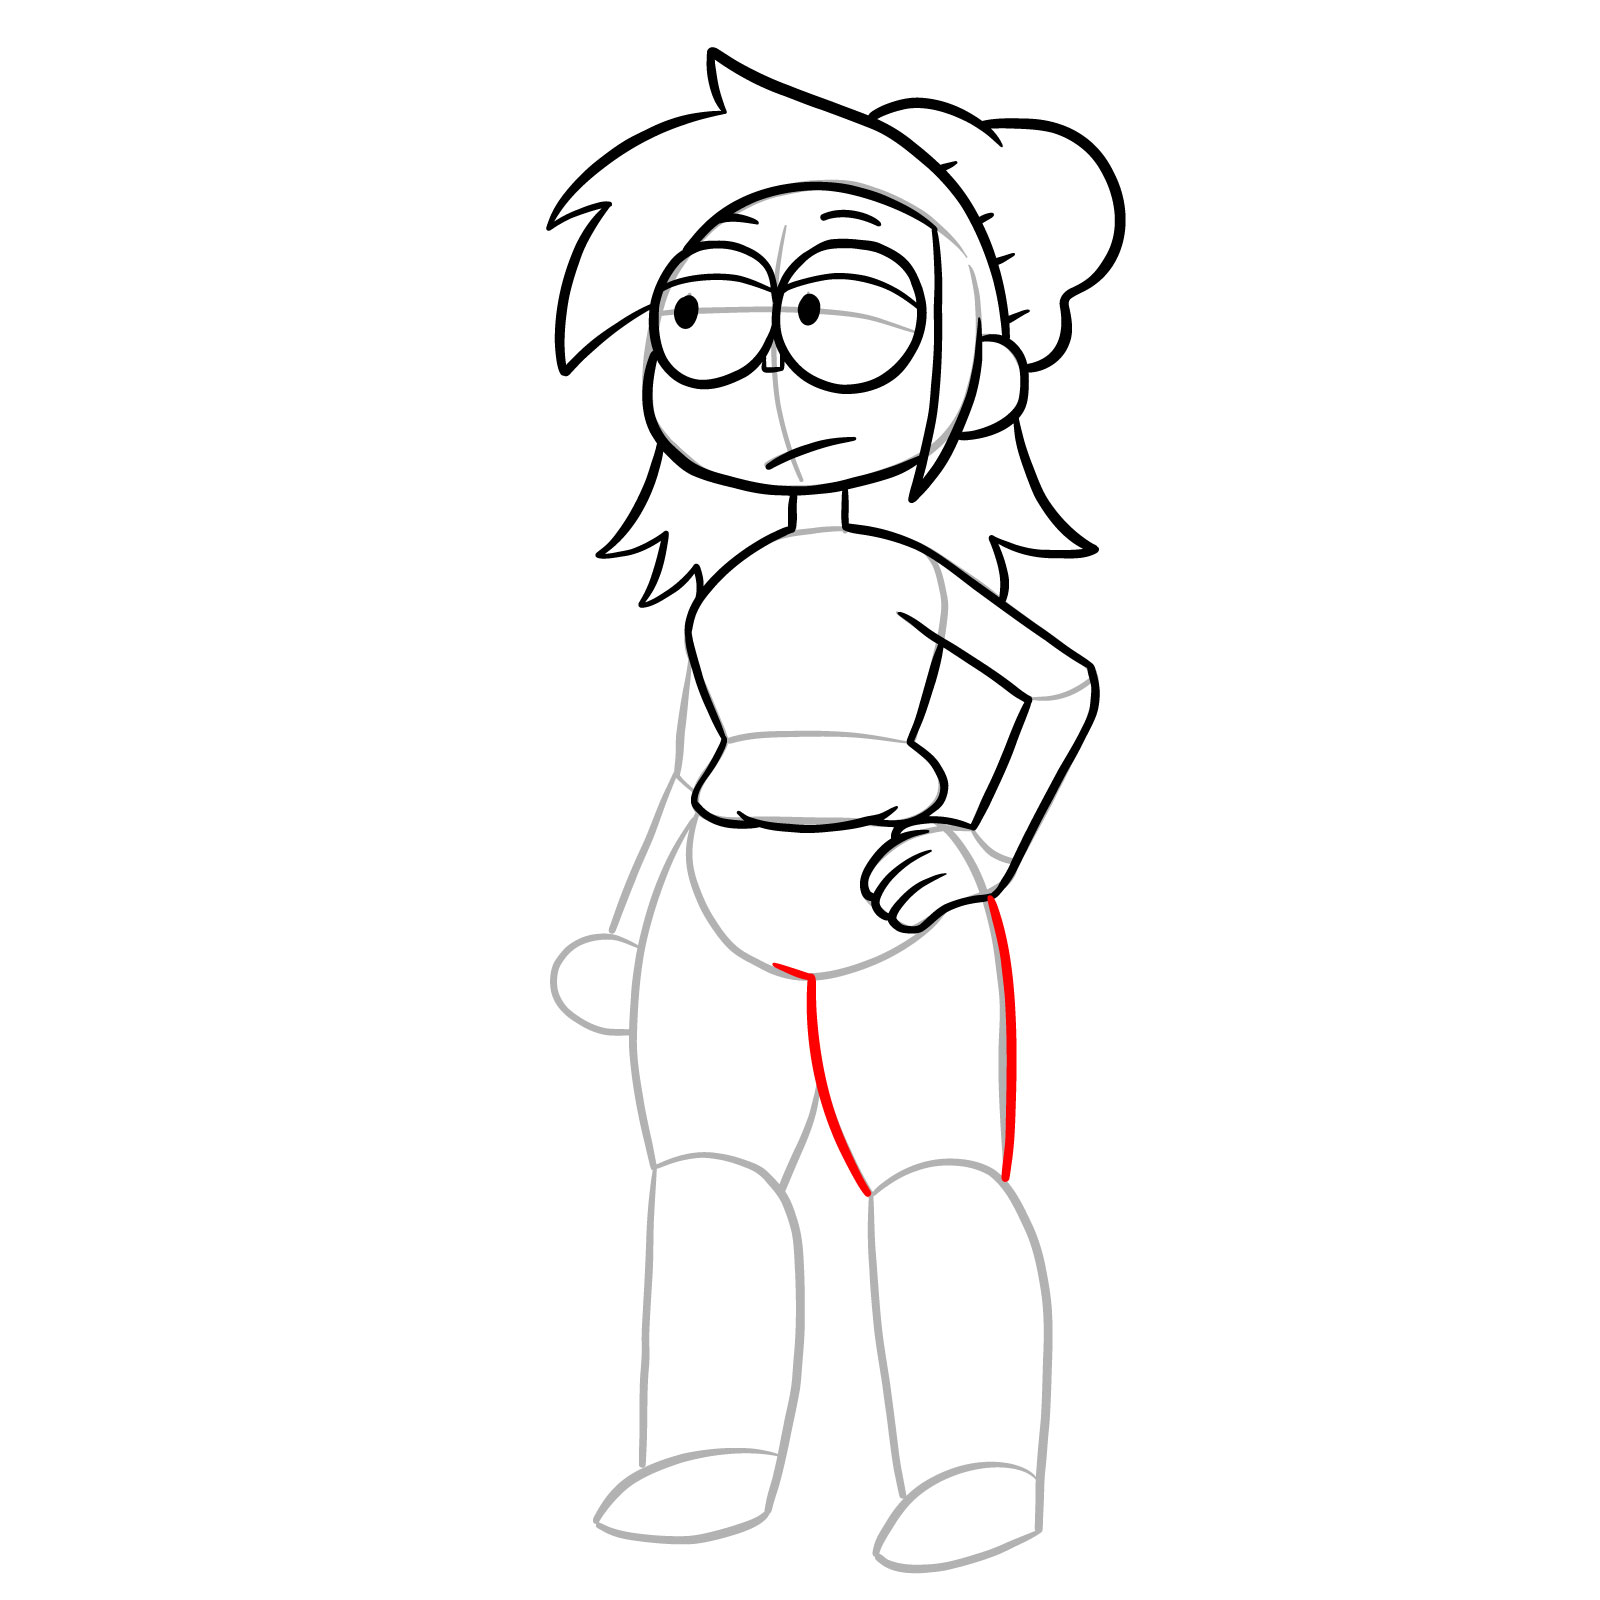 How to draw Actor Enid from OK K.O.! - step 16